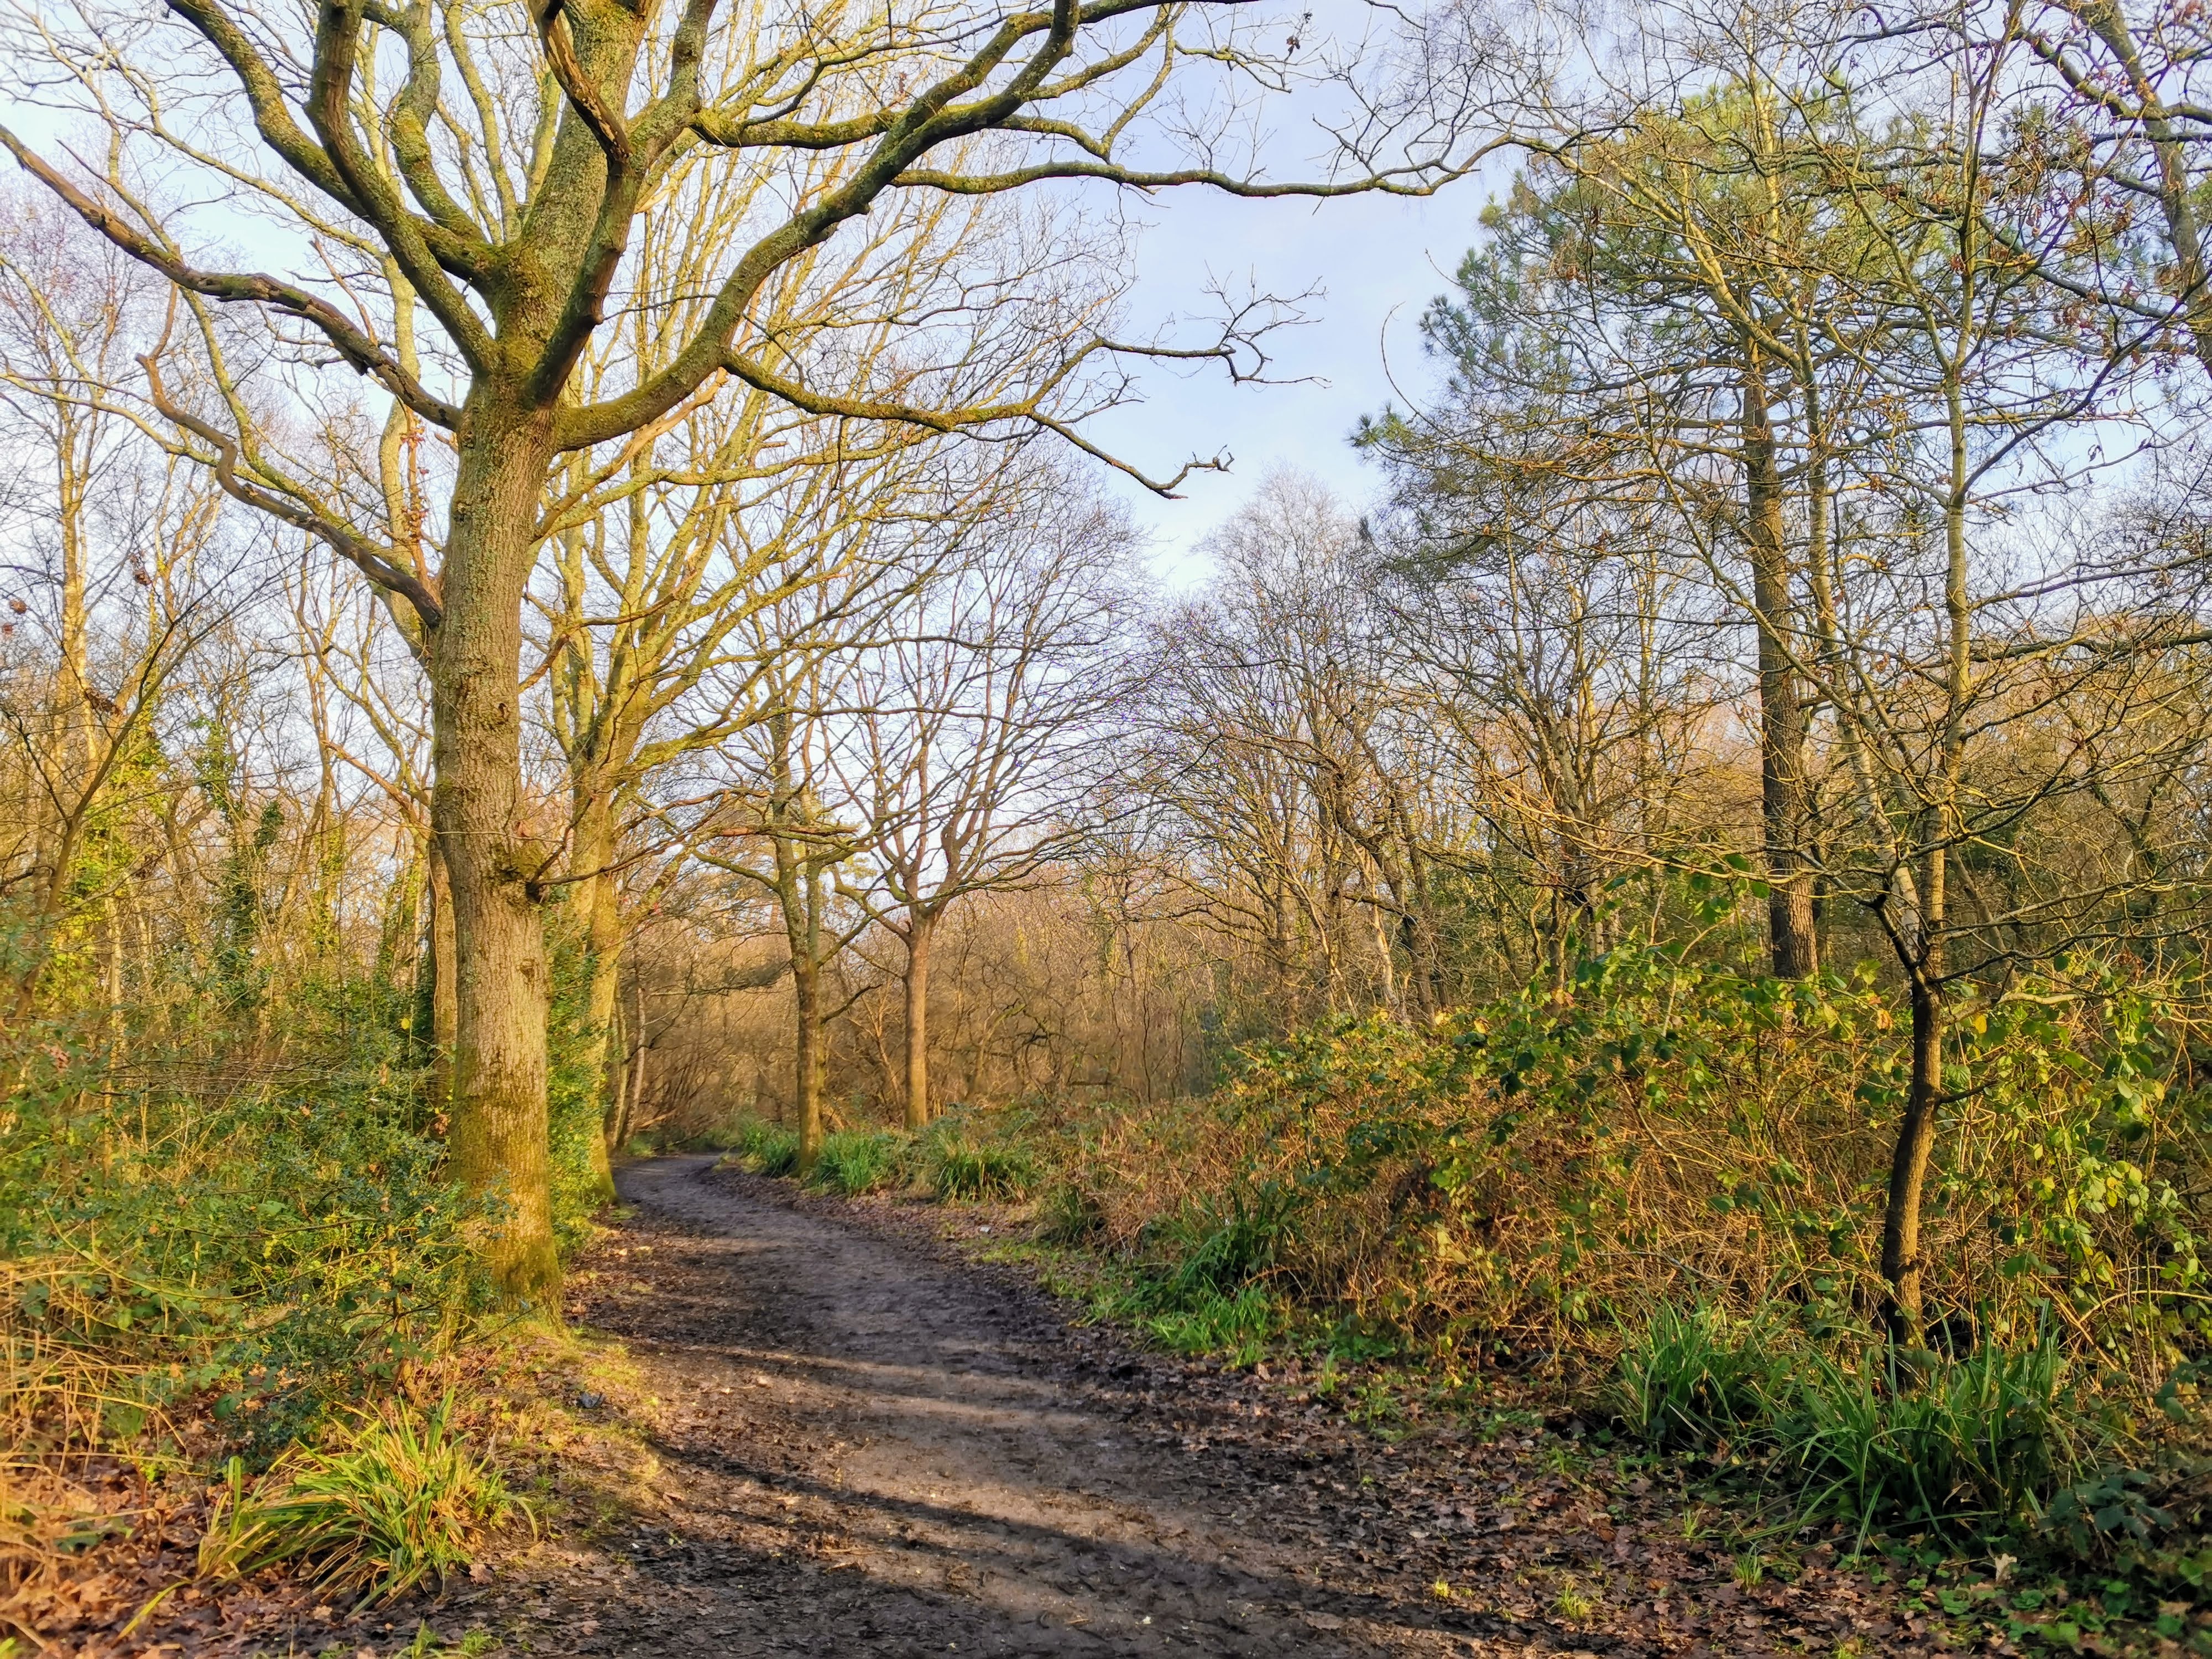 Bourne Valley Nature Reserve